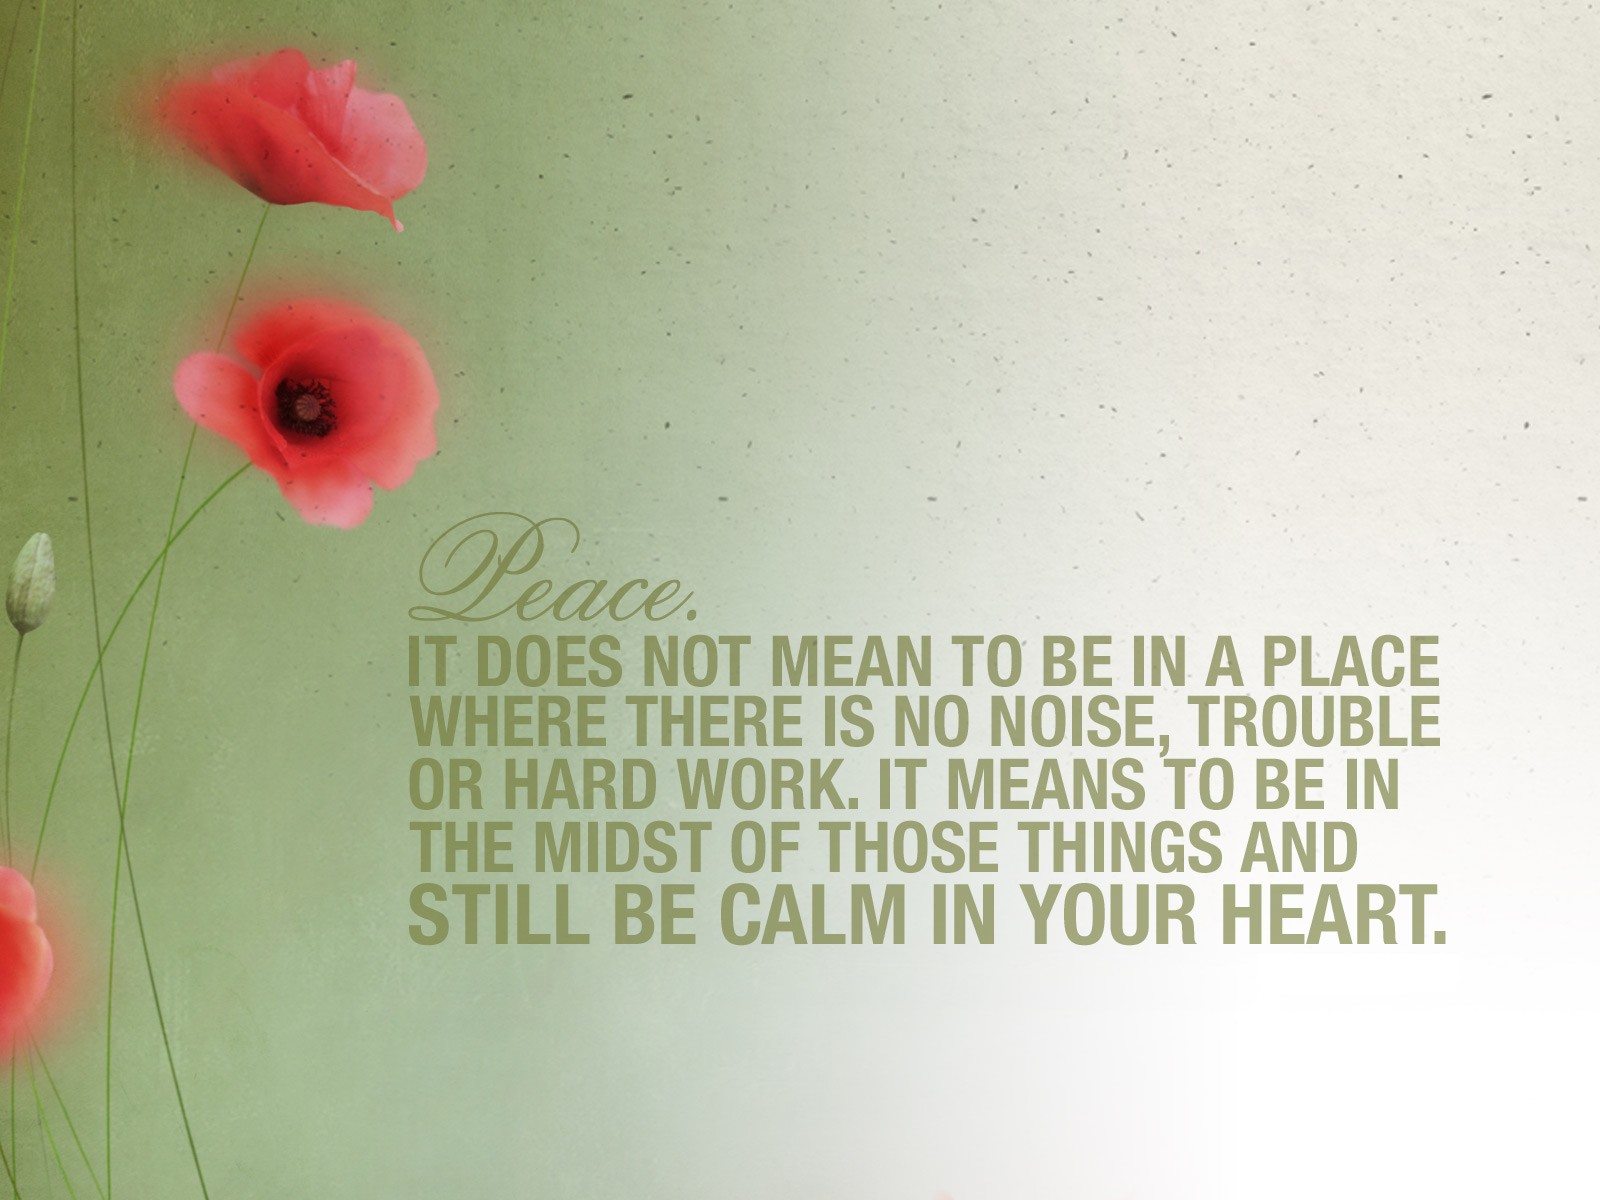 Thought For The Day - Corn Poppy - HD Wallpaper 